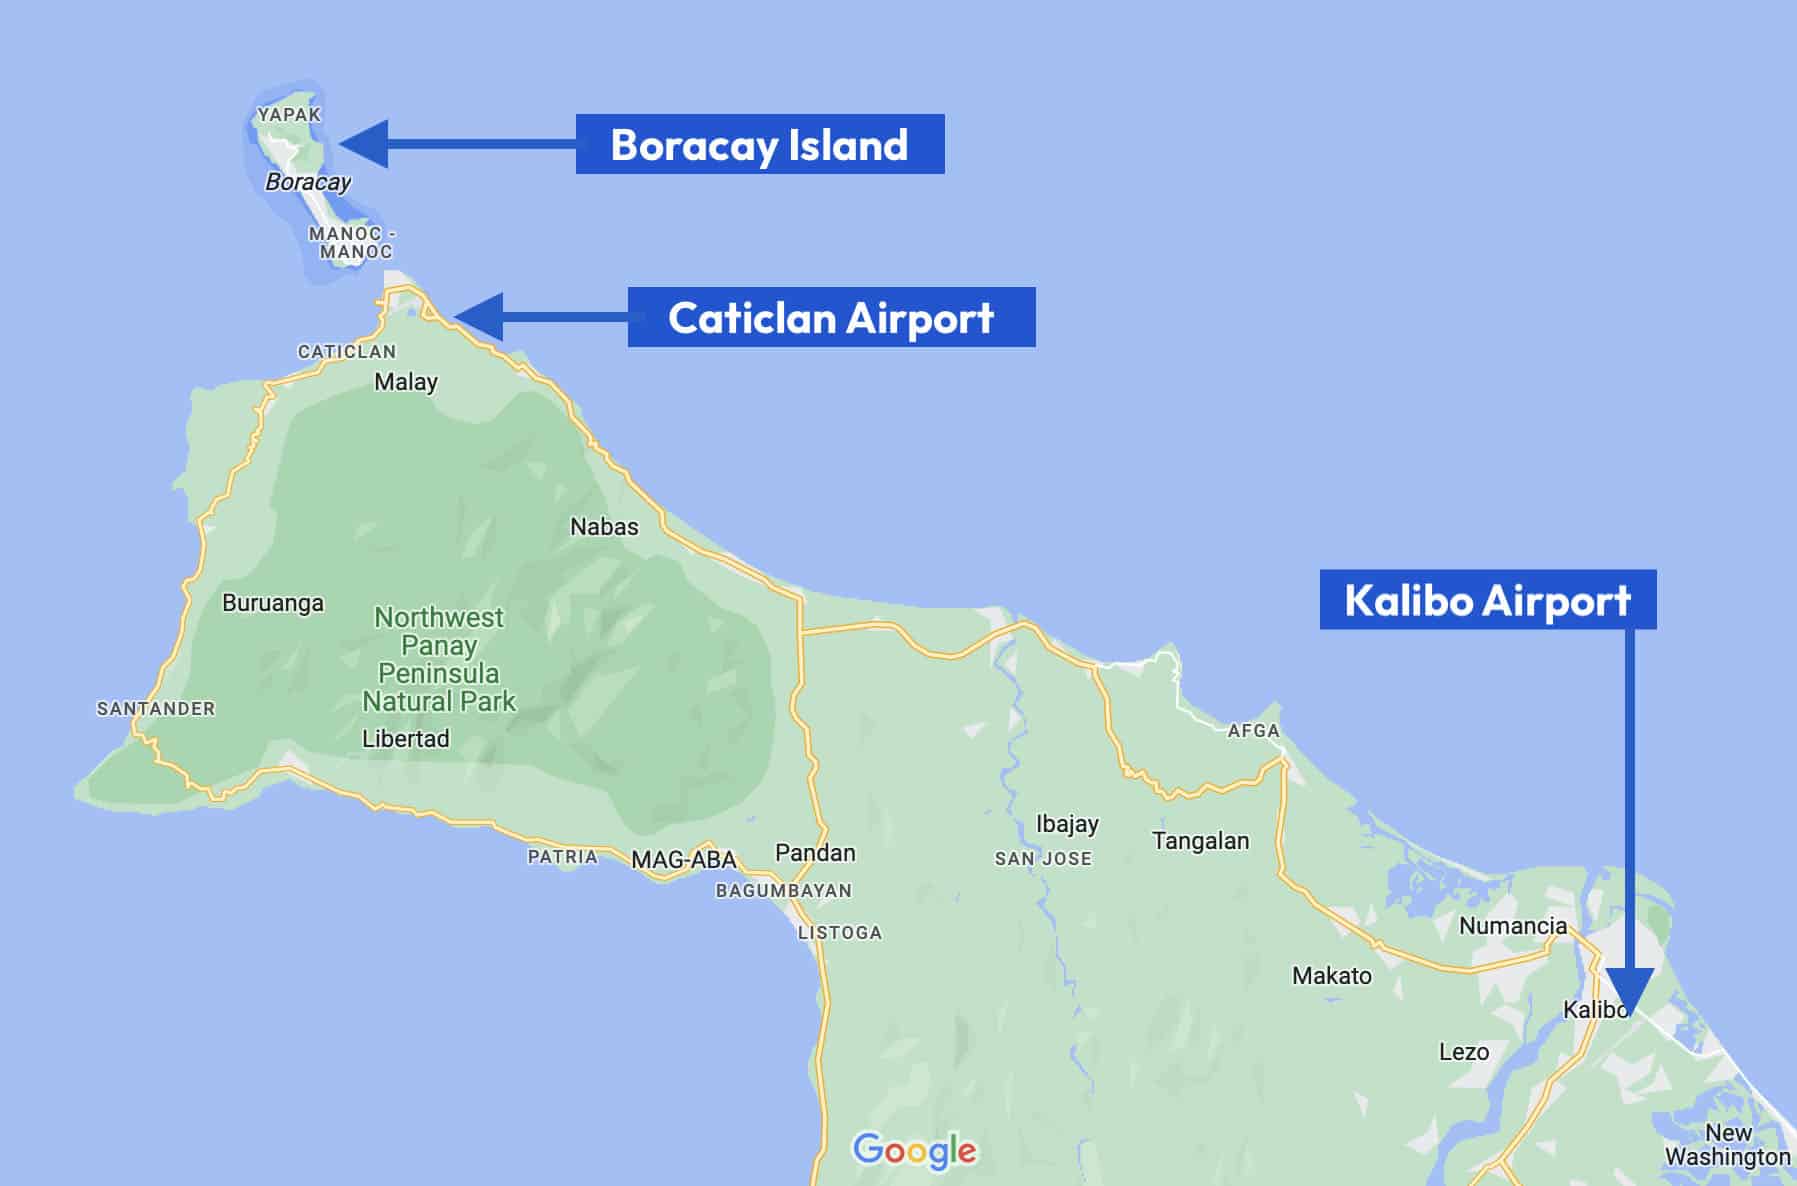 Distance of Boracay from Kalibo Airport and Caticlan Airport